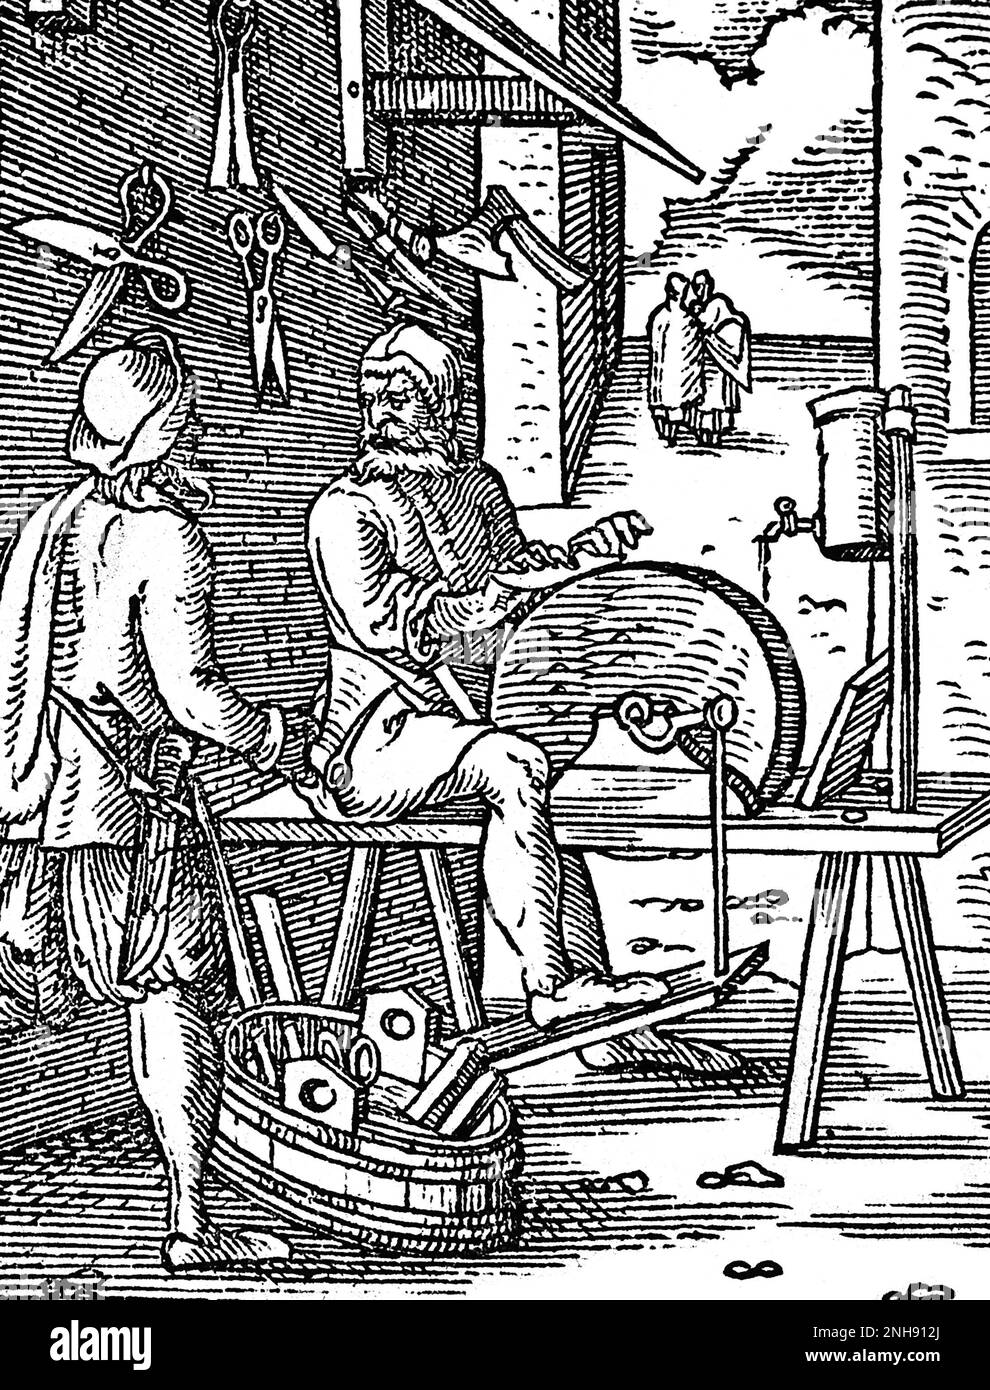 A knife-grinder sharpening a blade on a grinding wheel as a customer arrives with a plane to be sharpened. Illustration from Jost Amman's Book of Trades, 1568. Stock Photo